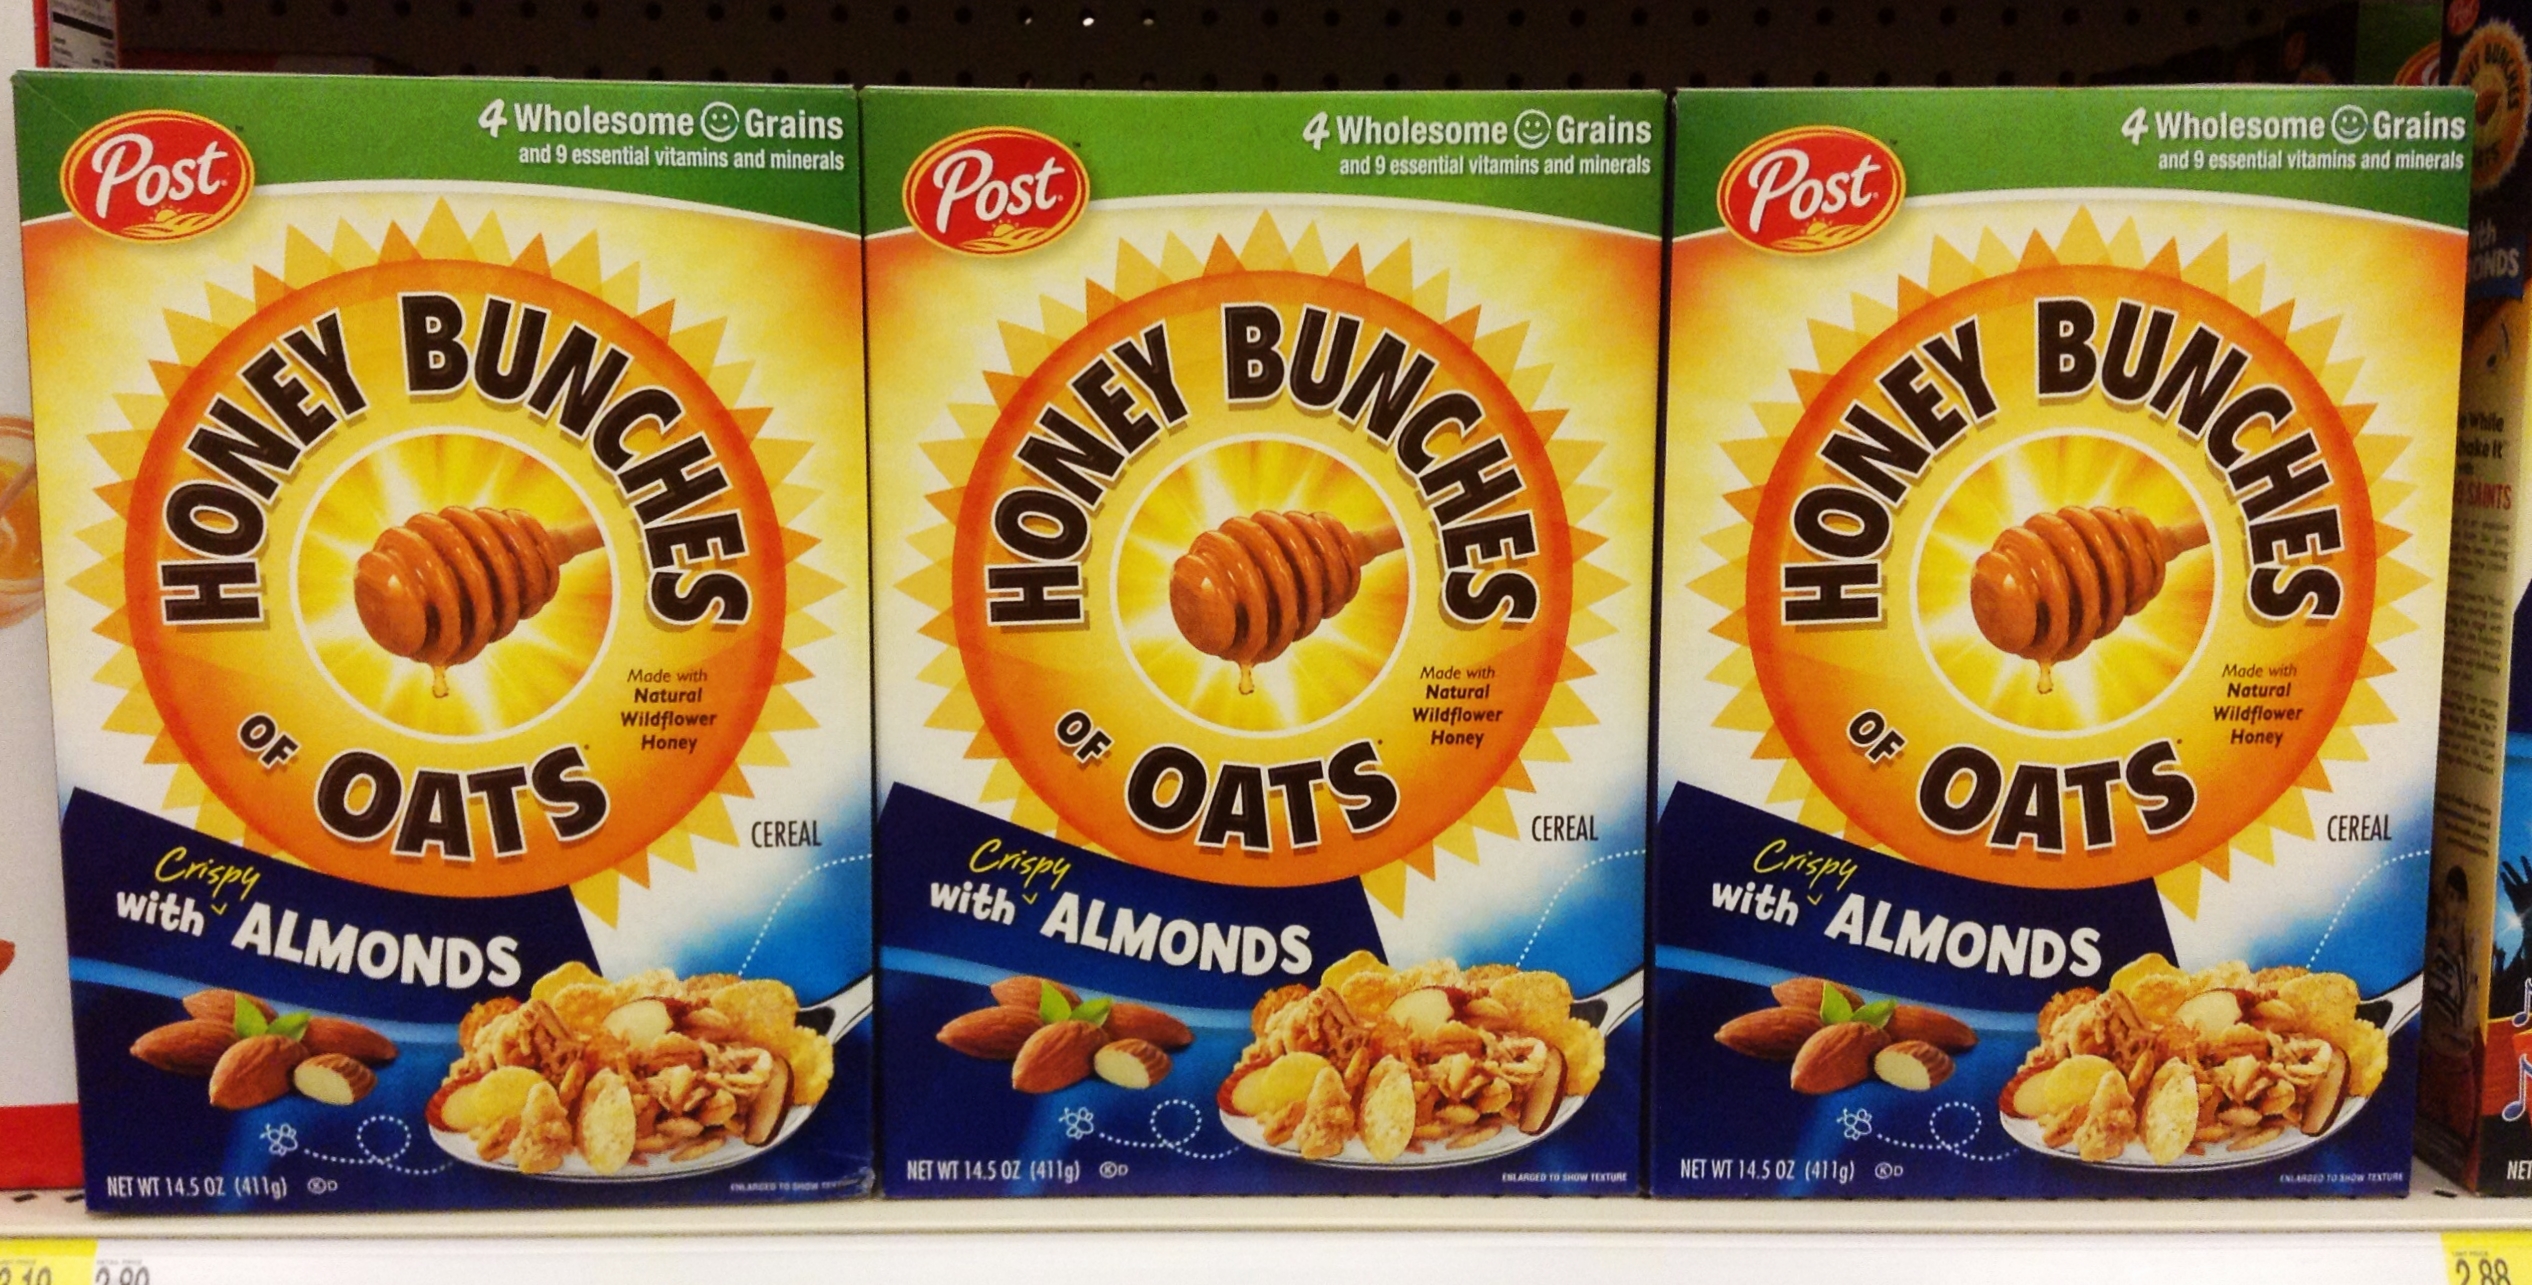 three boxes of honey bunches oats with almonds are displayed on the shelf in a store